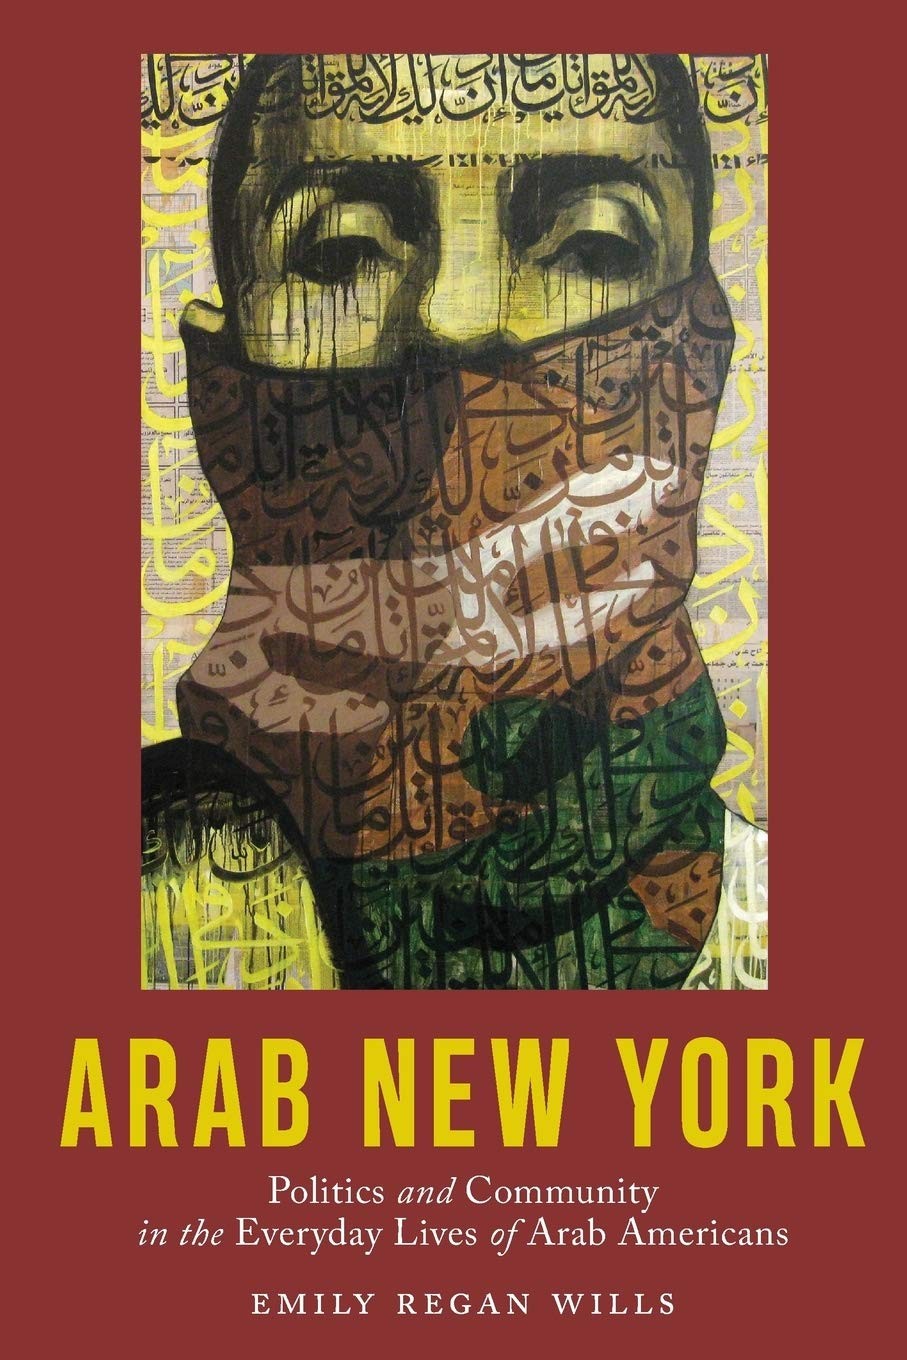 Book cover for Arab New York by Emily Regan Wills